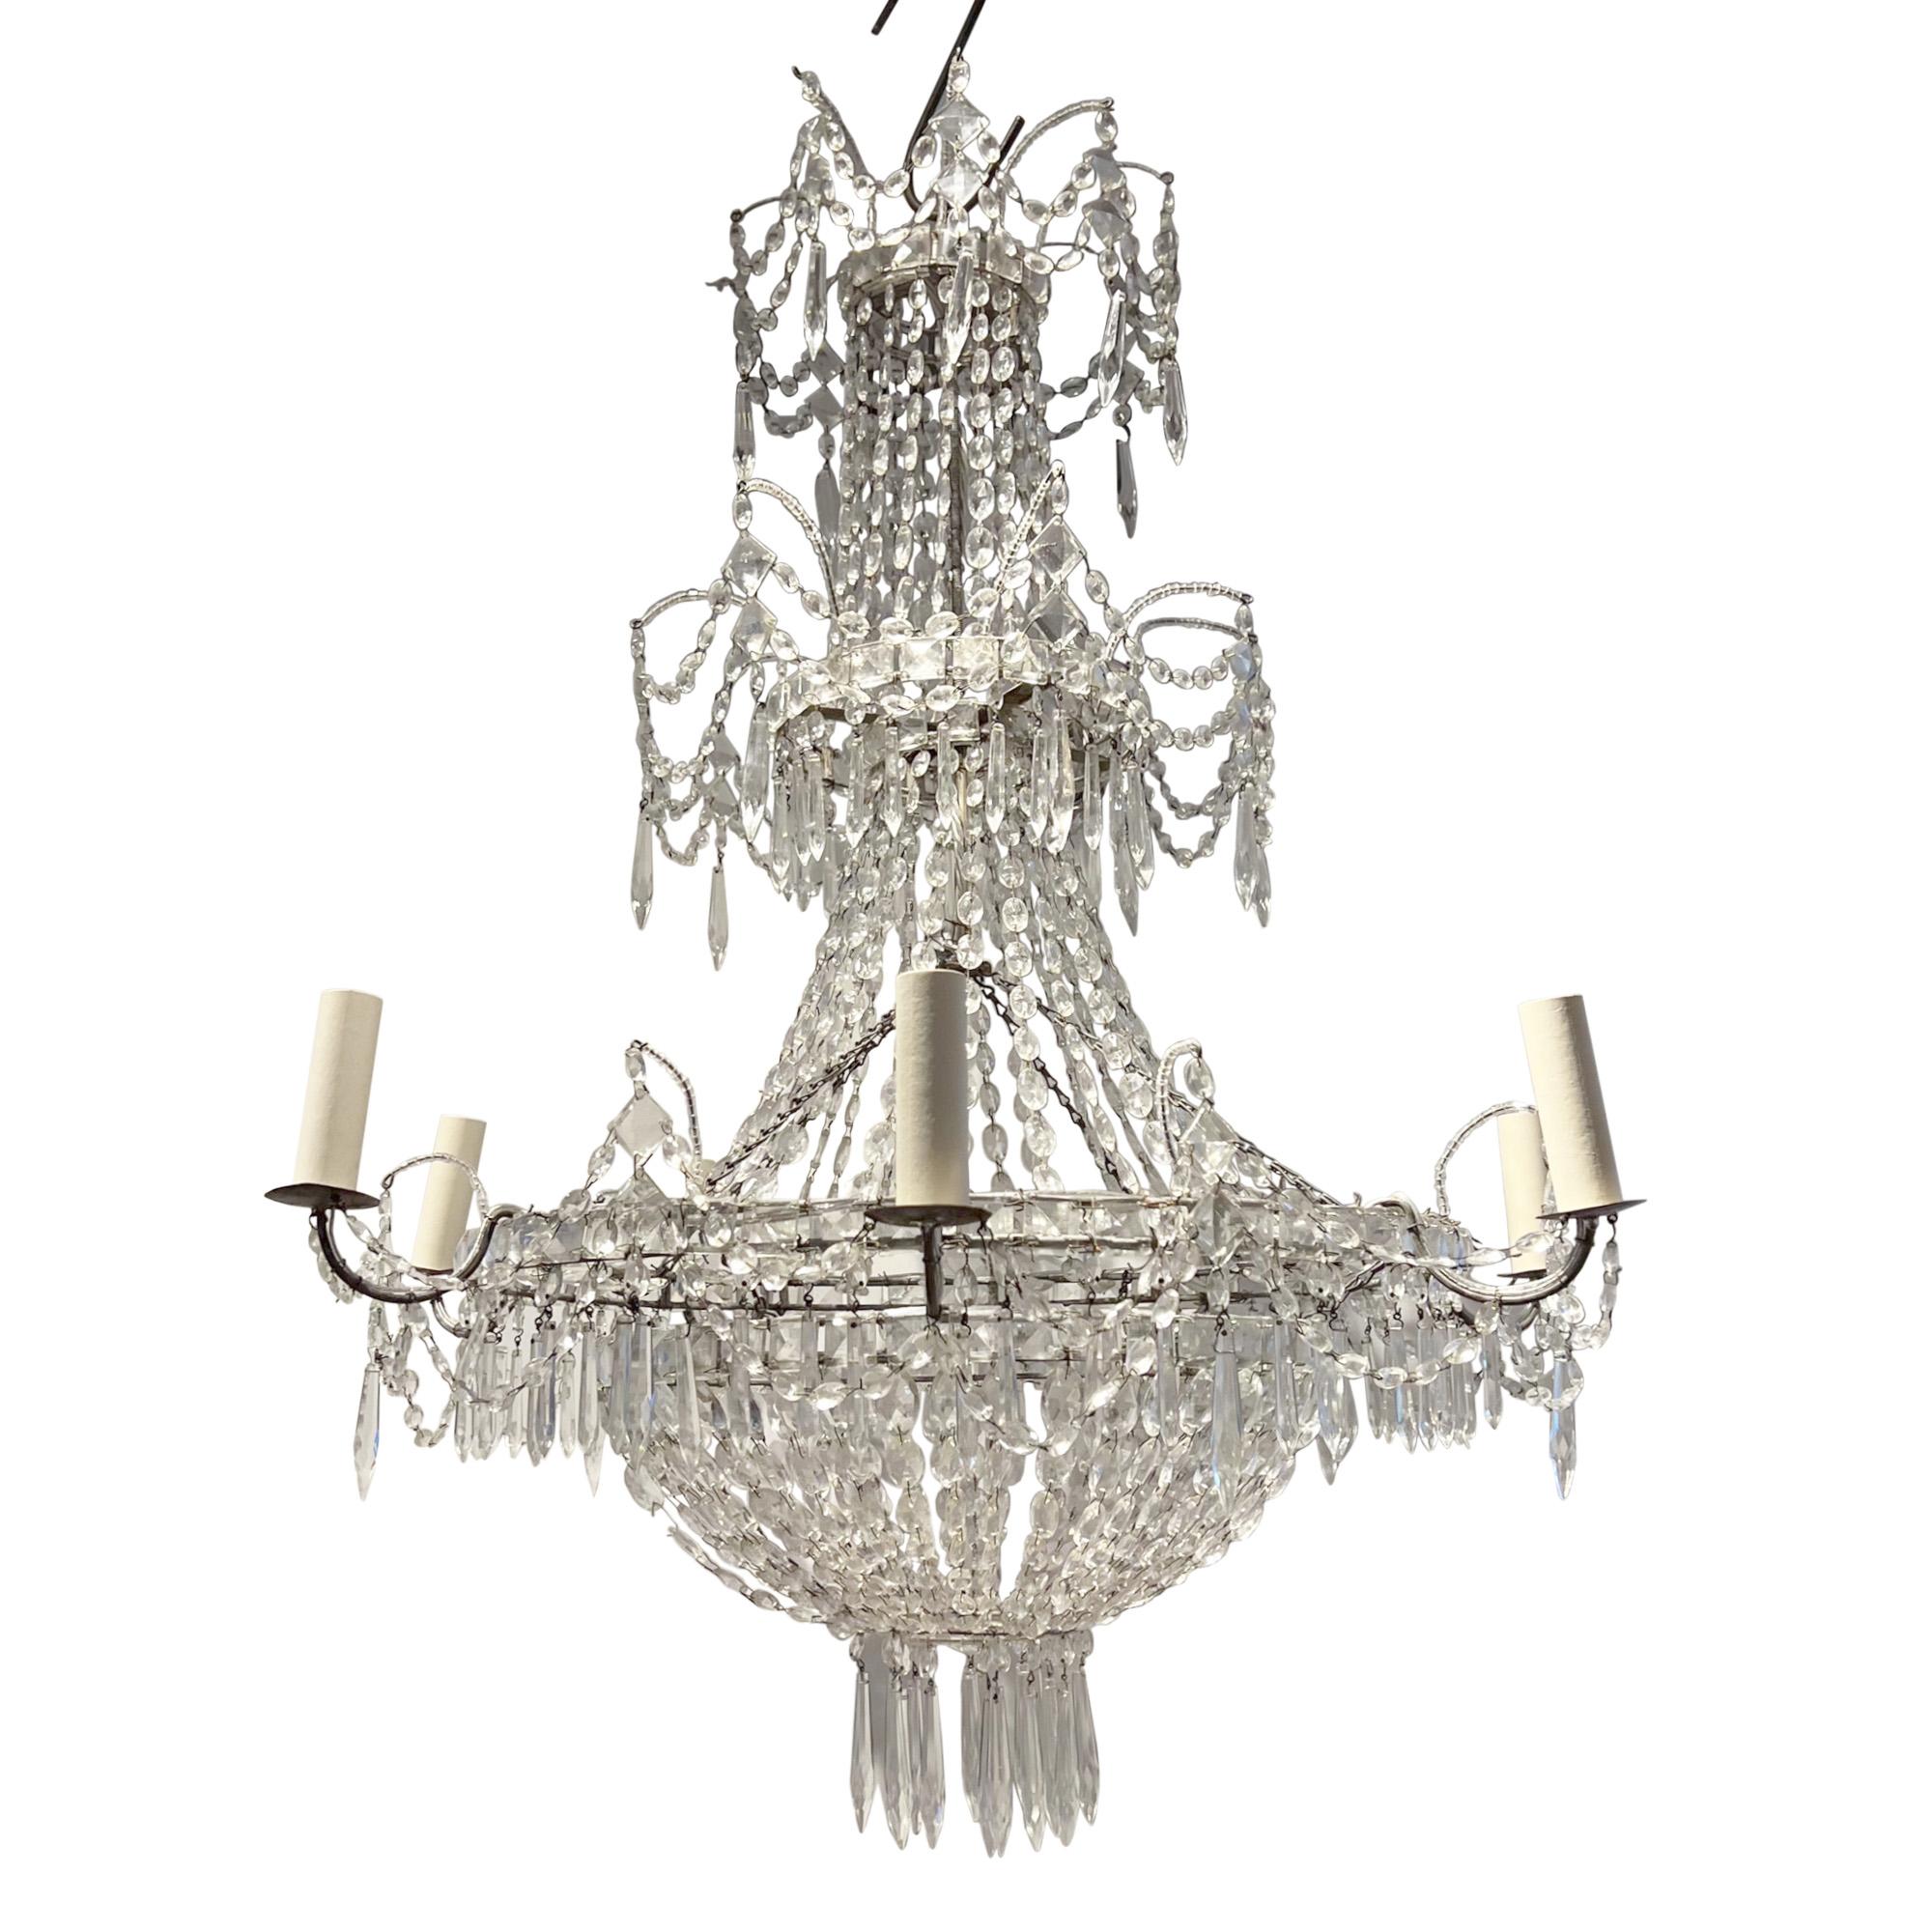 This is a really spectacular chandelier.

Made in France in the 1920s - it has an intricately strung beaded design. Take a look at all our pictures to see the detail.

With 7 arms, this would be a lovely light for any room in the house. 

This